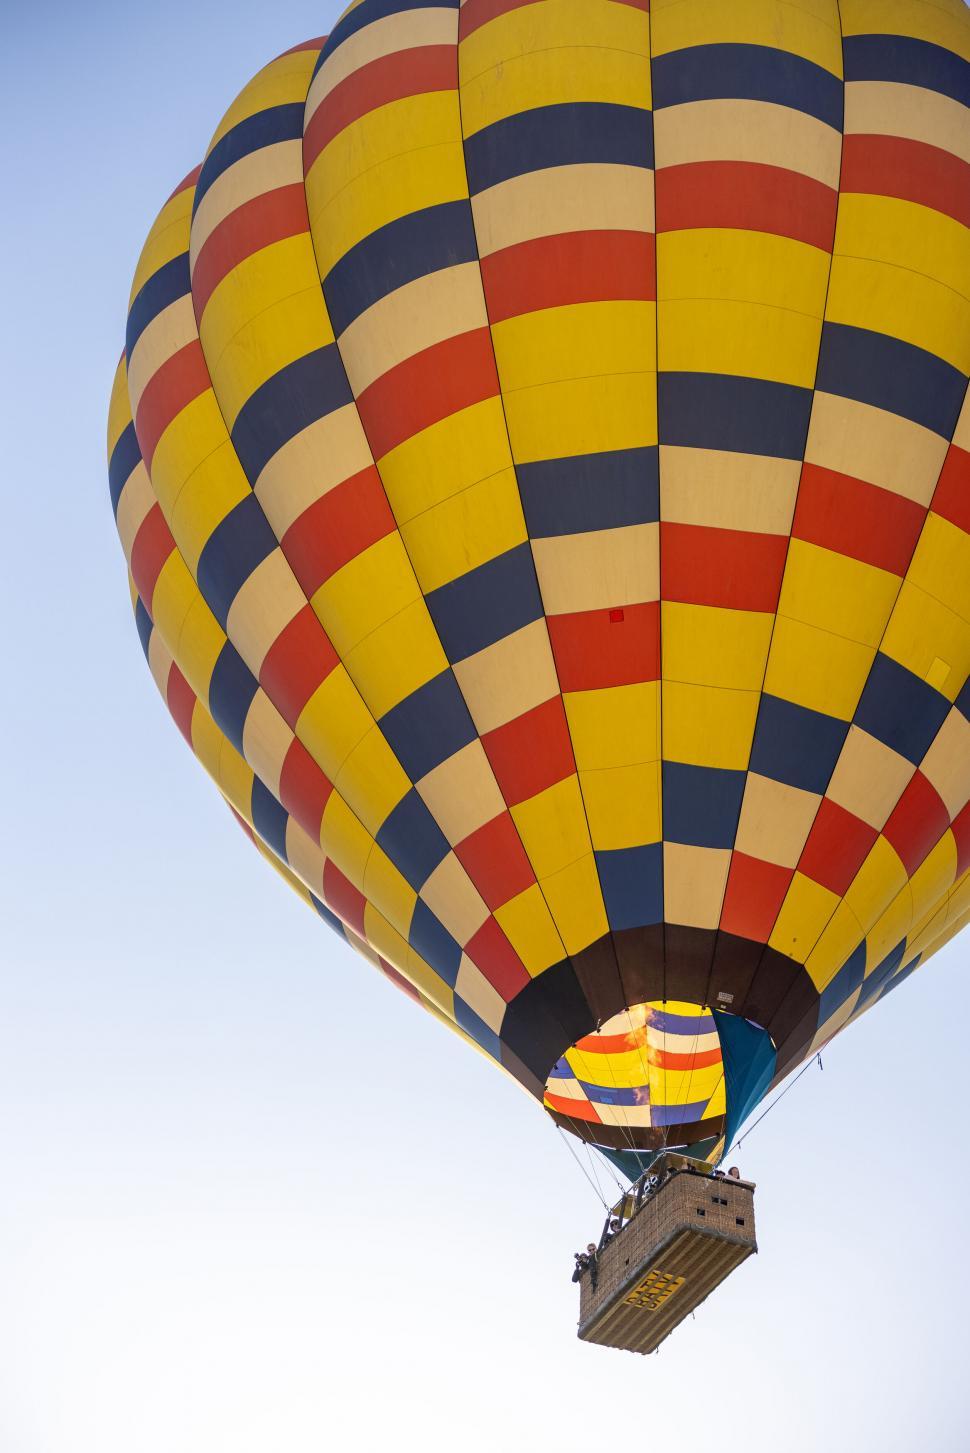 Free Image of Colorful hot air balloon against blue sky 